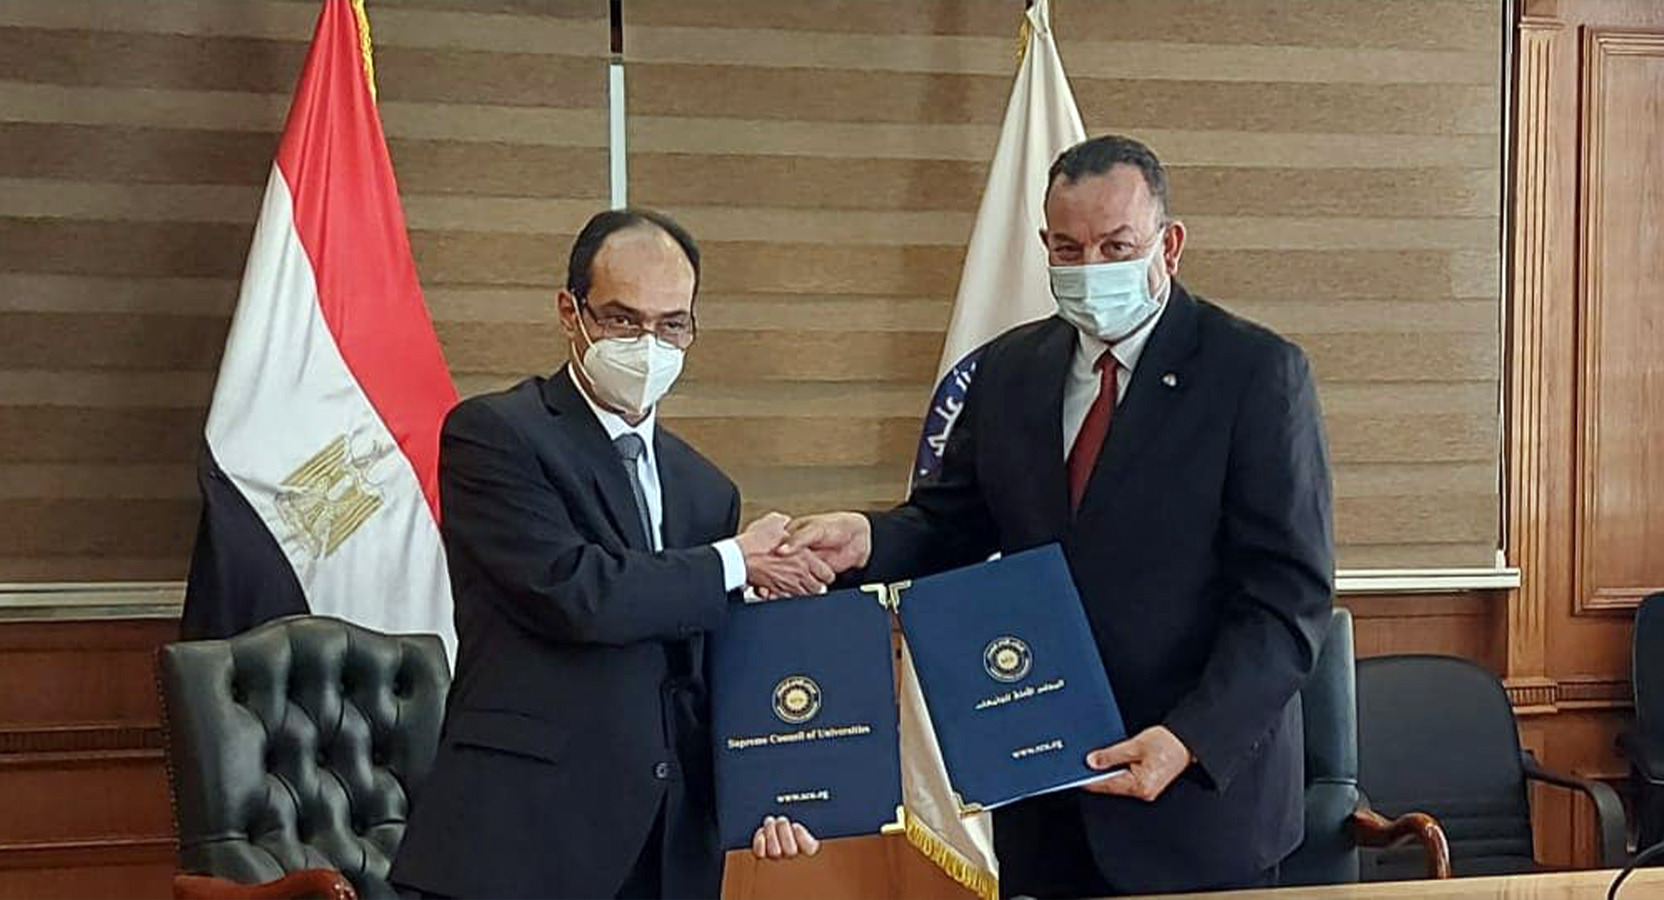 A cooperation protocol between the Electronic and Knowledge Services Center of the Supreme Council of Universities and New Mansoura University to grant a certificate in the basics of digital transformation